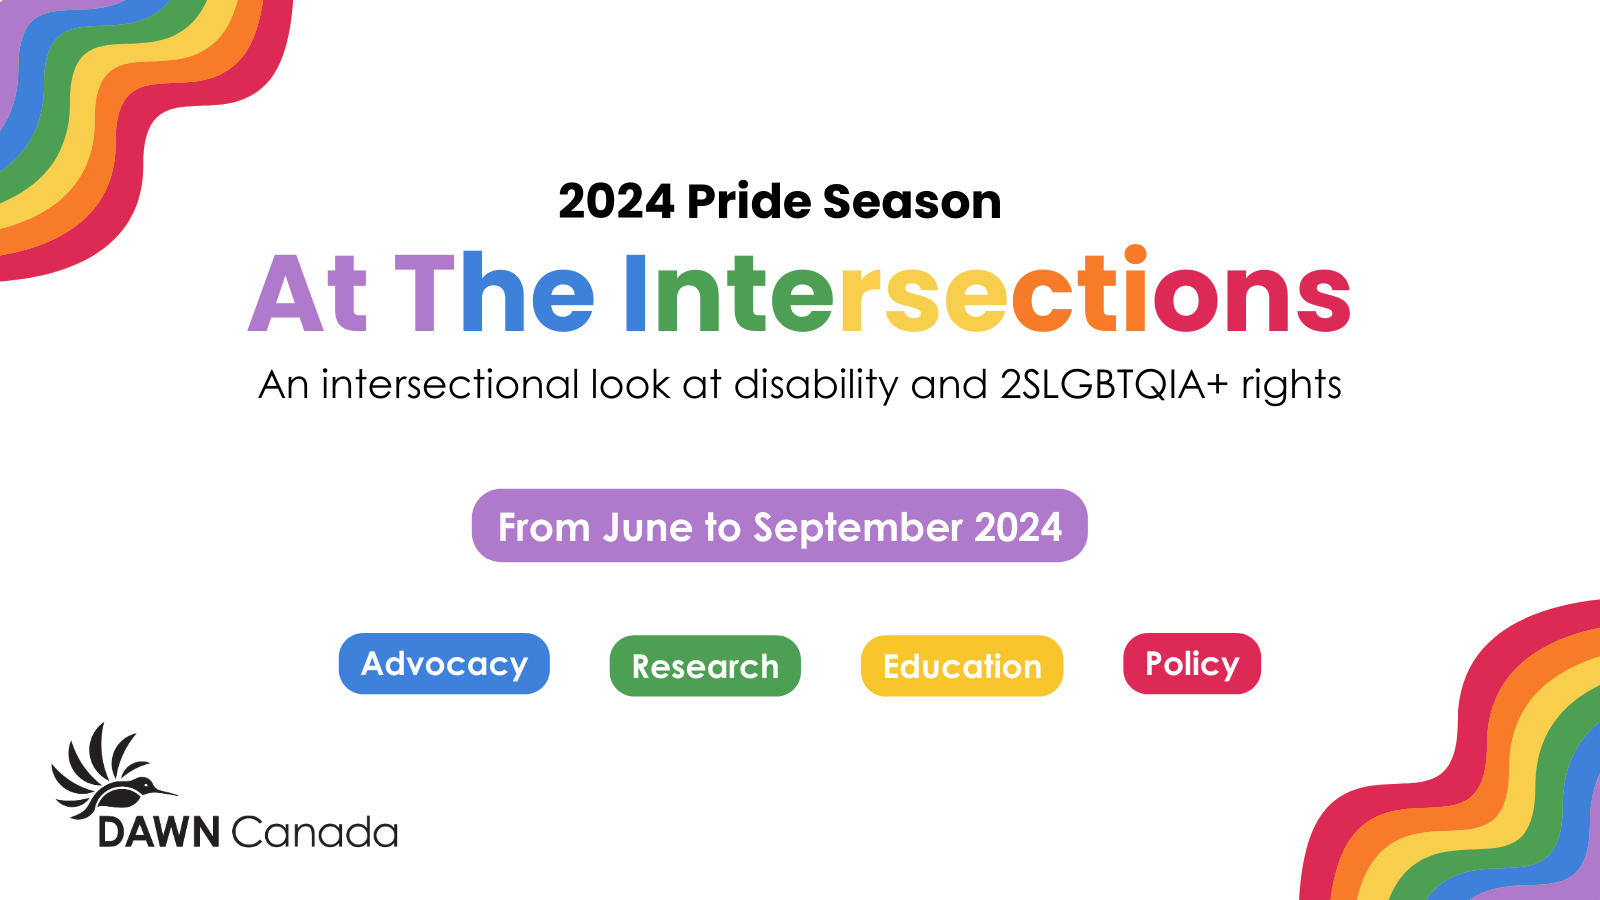 2024 Pride Season - At The Intersections Campaign